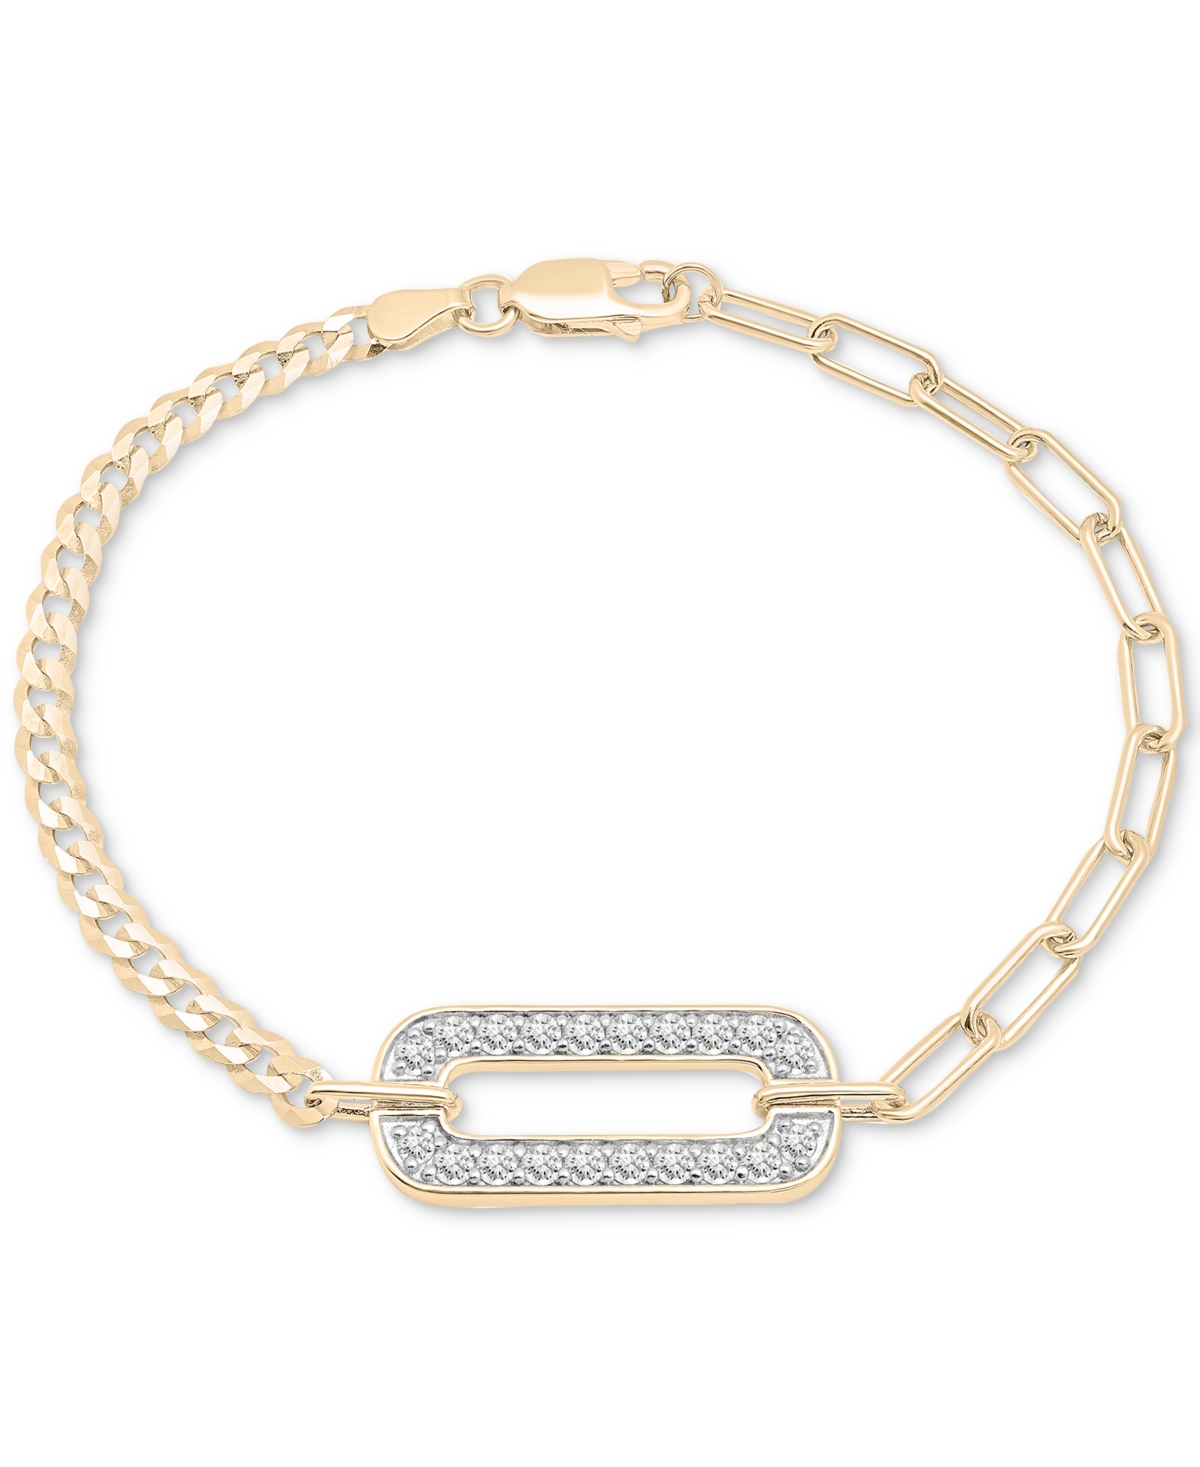 Diamond Link Two-Chain Bracelet (3/4 ct. t.w.) in Gold Vermeil, Created for Macy's - Gold Vermeil